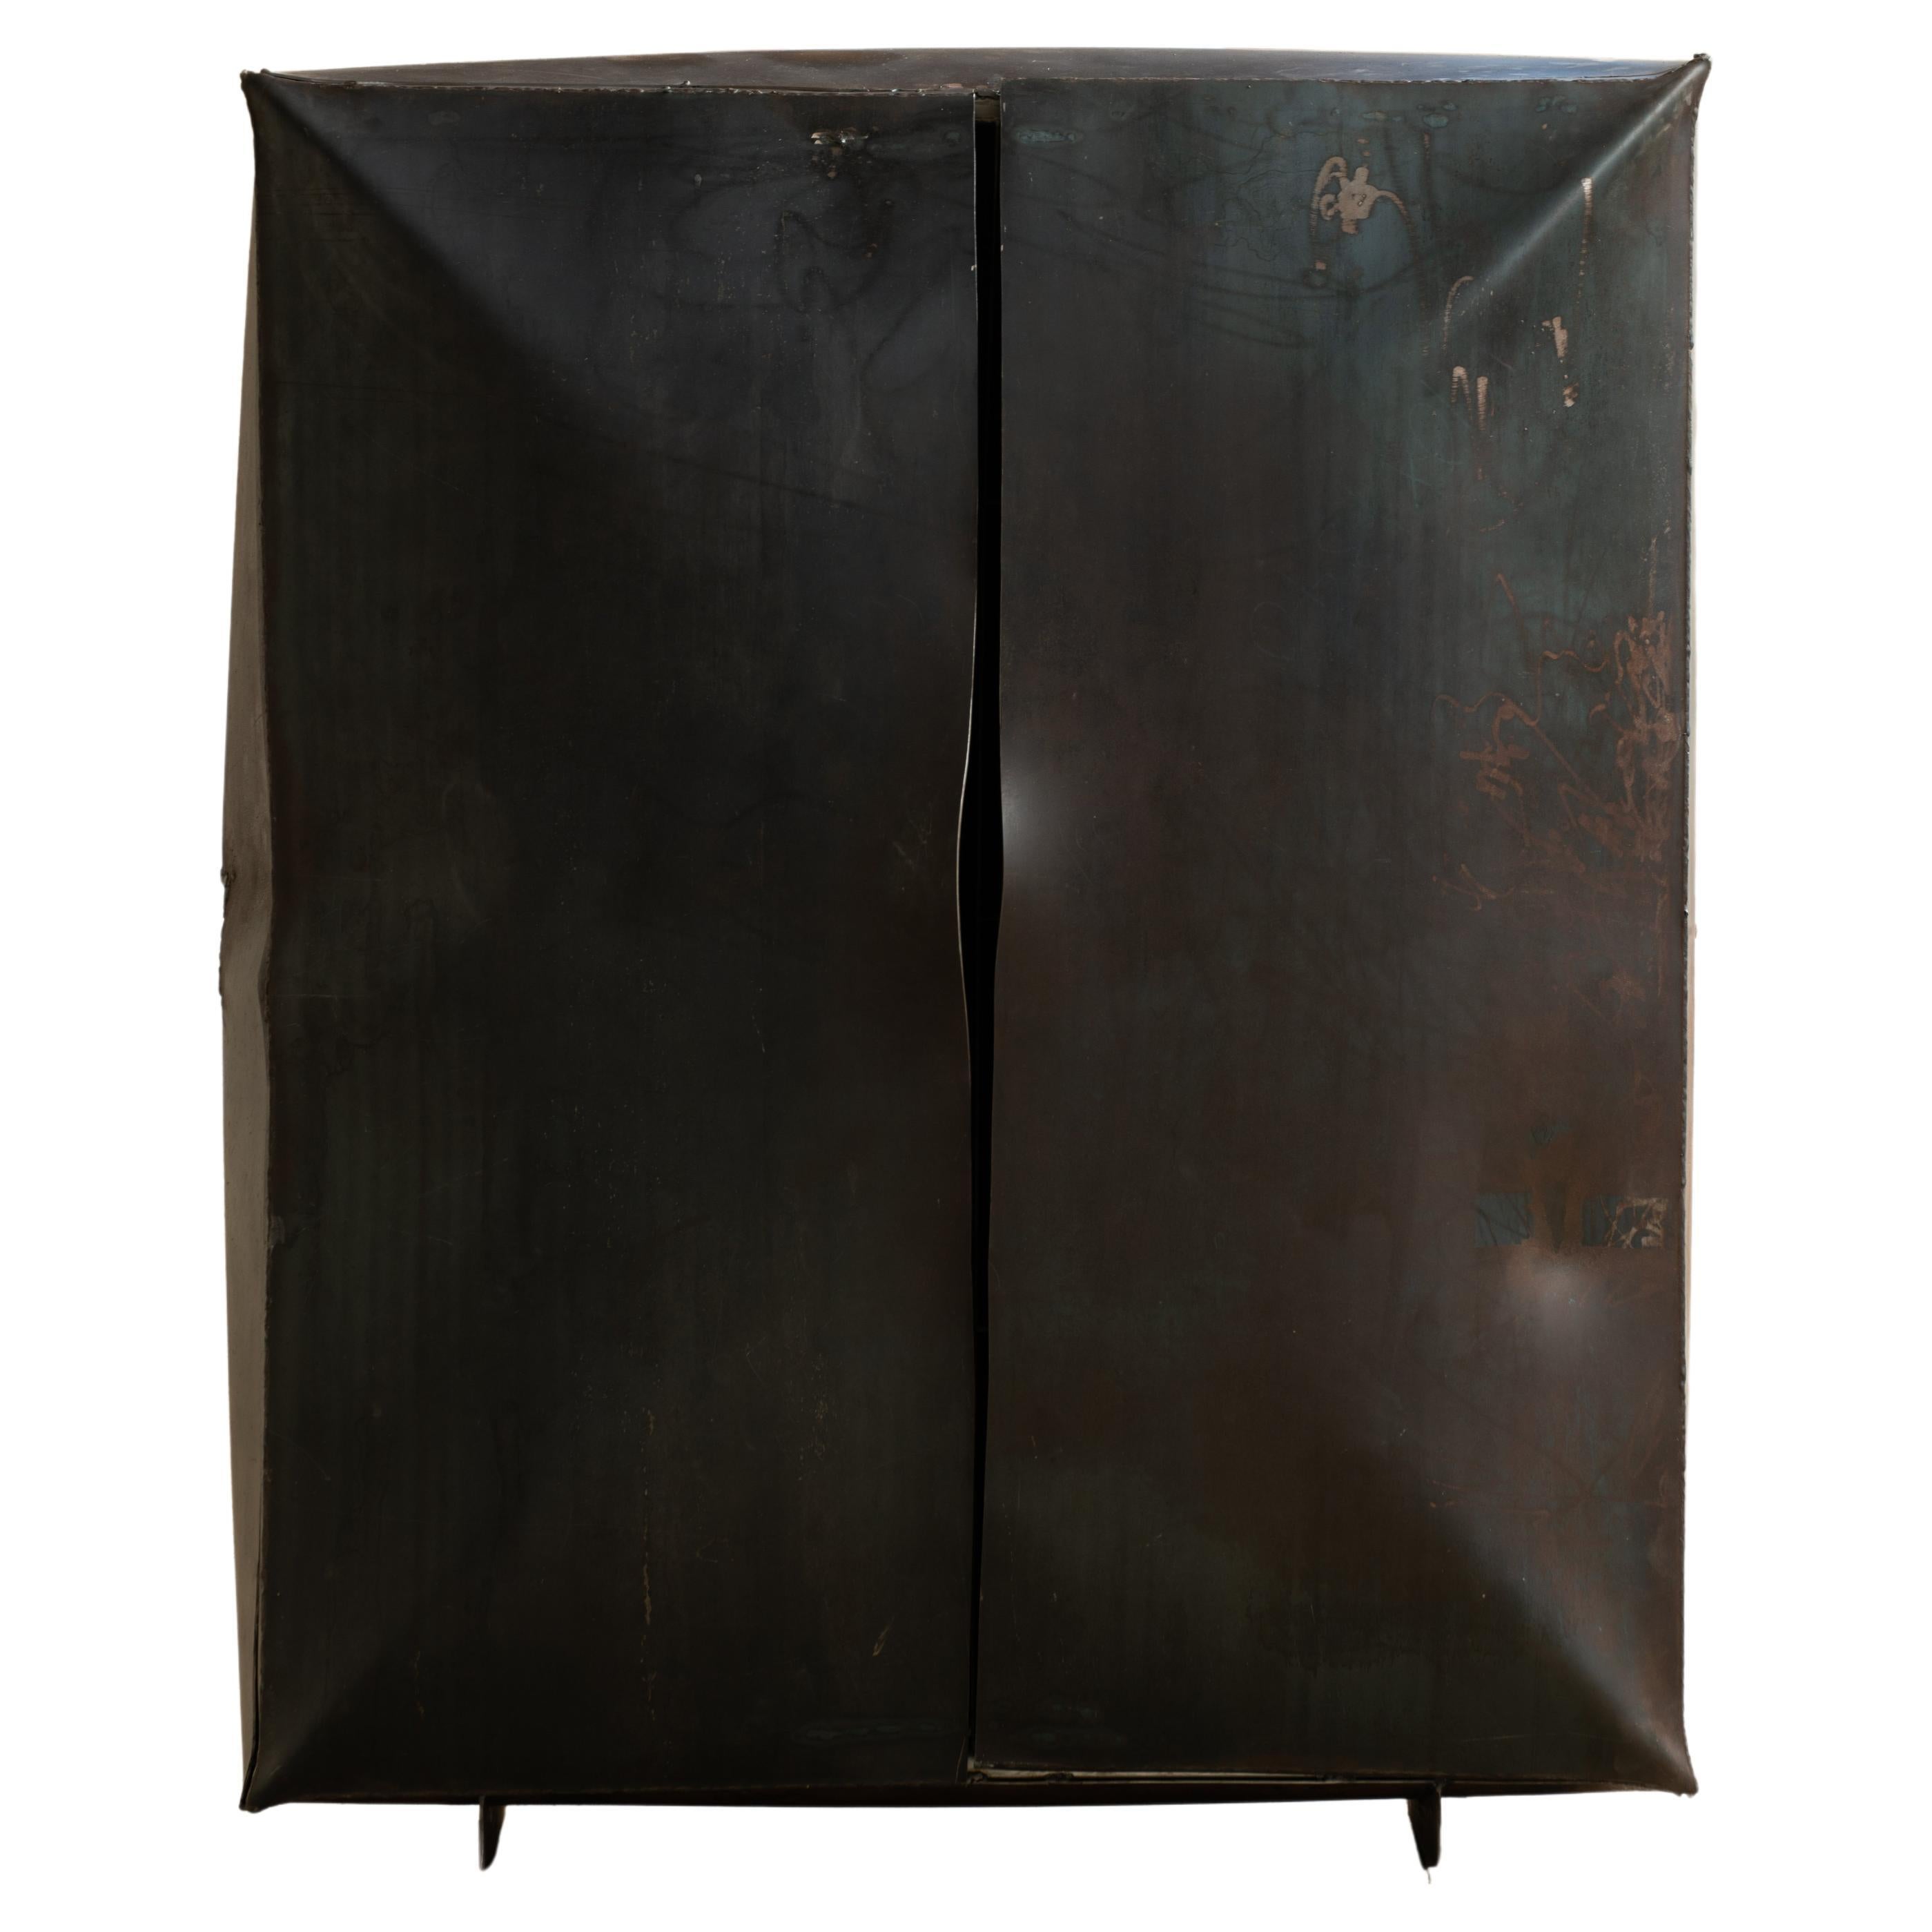 Contemporary with dynamite exploded 'Lose control' SteelCabinet by Mircea Anghel